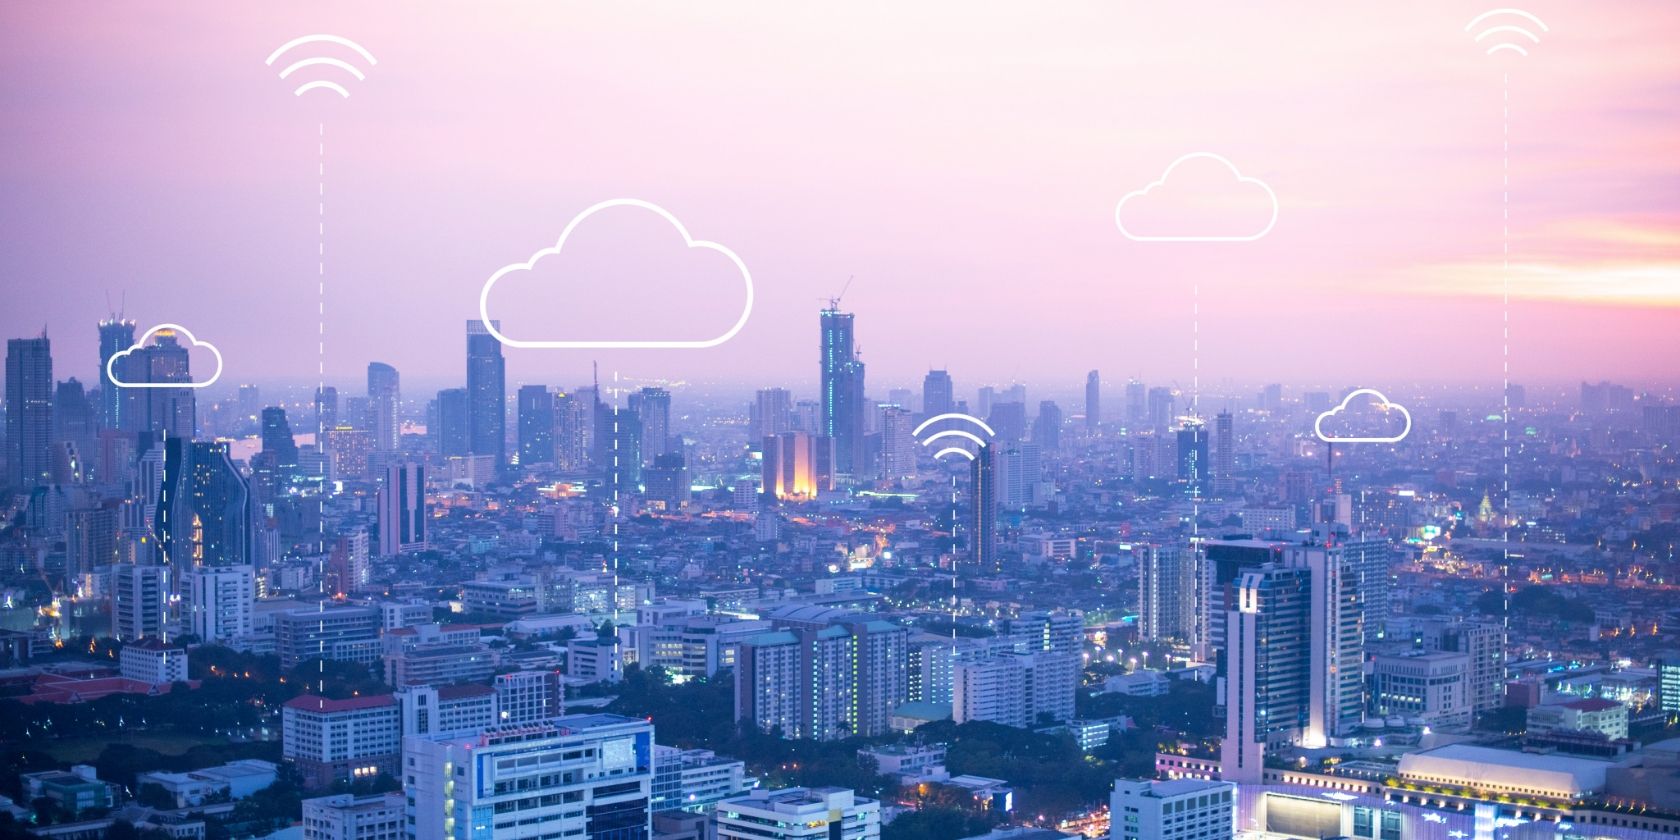 City with connection and cloud logos hovering above buildings